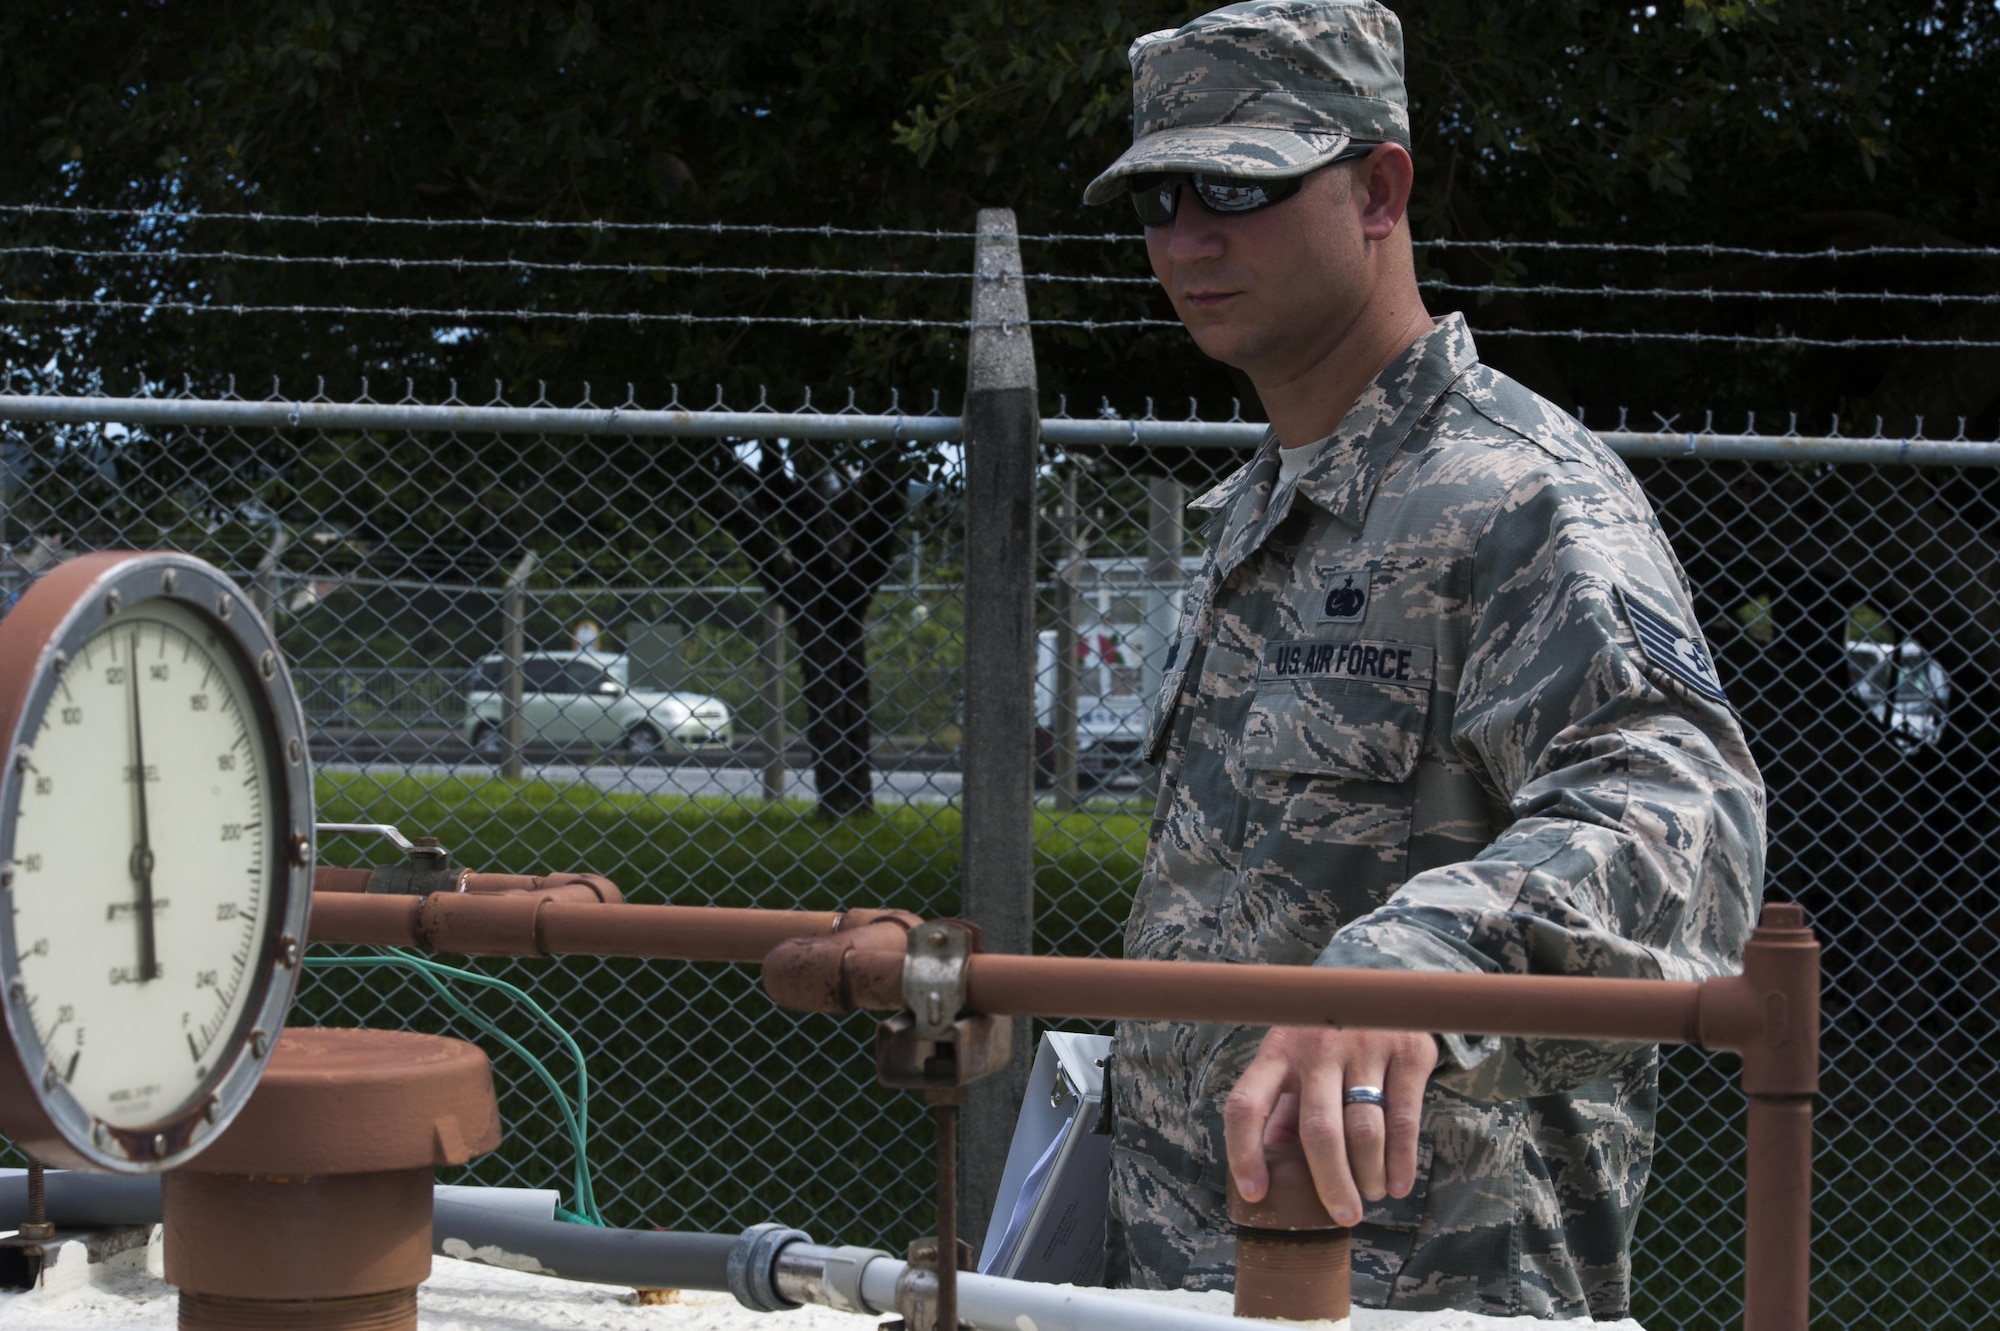 U.S. Air Force Tech. Sgt. Matthew Young, 18th Logistics Readiness Squadron fuels quality assurance evaluator, conducts an organizational tank inspection June 21, 2016, at Kadena Air Base, Japan. The inspection included checking the safety of tanks for the surrounding environment and security from tampering. The tanks help fuel a lift station, which prevents flooding in housing and the local community. (U.S. Air Force photo by Airman 1st Class Lynette M. Rolen)